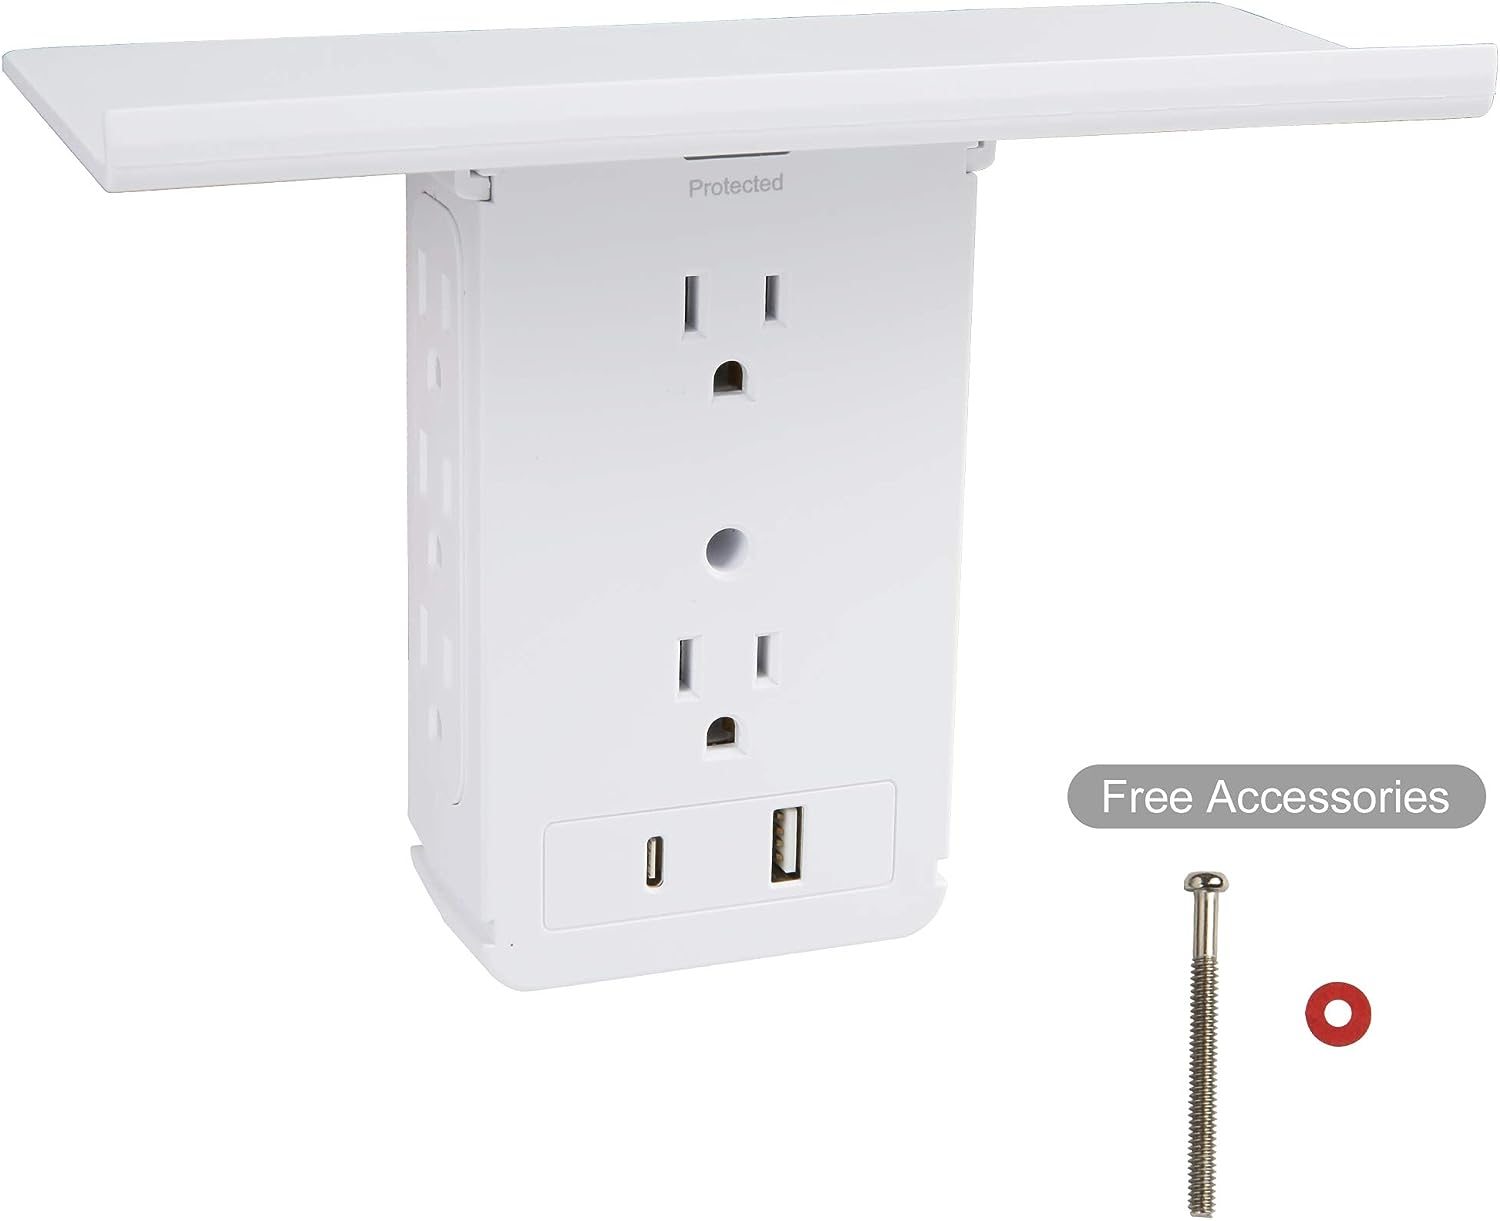 Socket Shelf Outlet 2 Pack Surge Protector Extender Wall plug with USB A+C Ports(3.4A Total), 8 AC Outlets